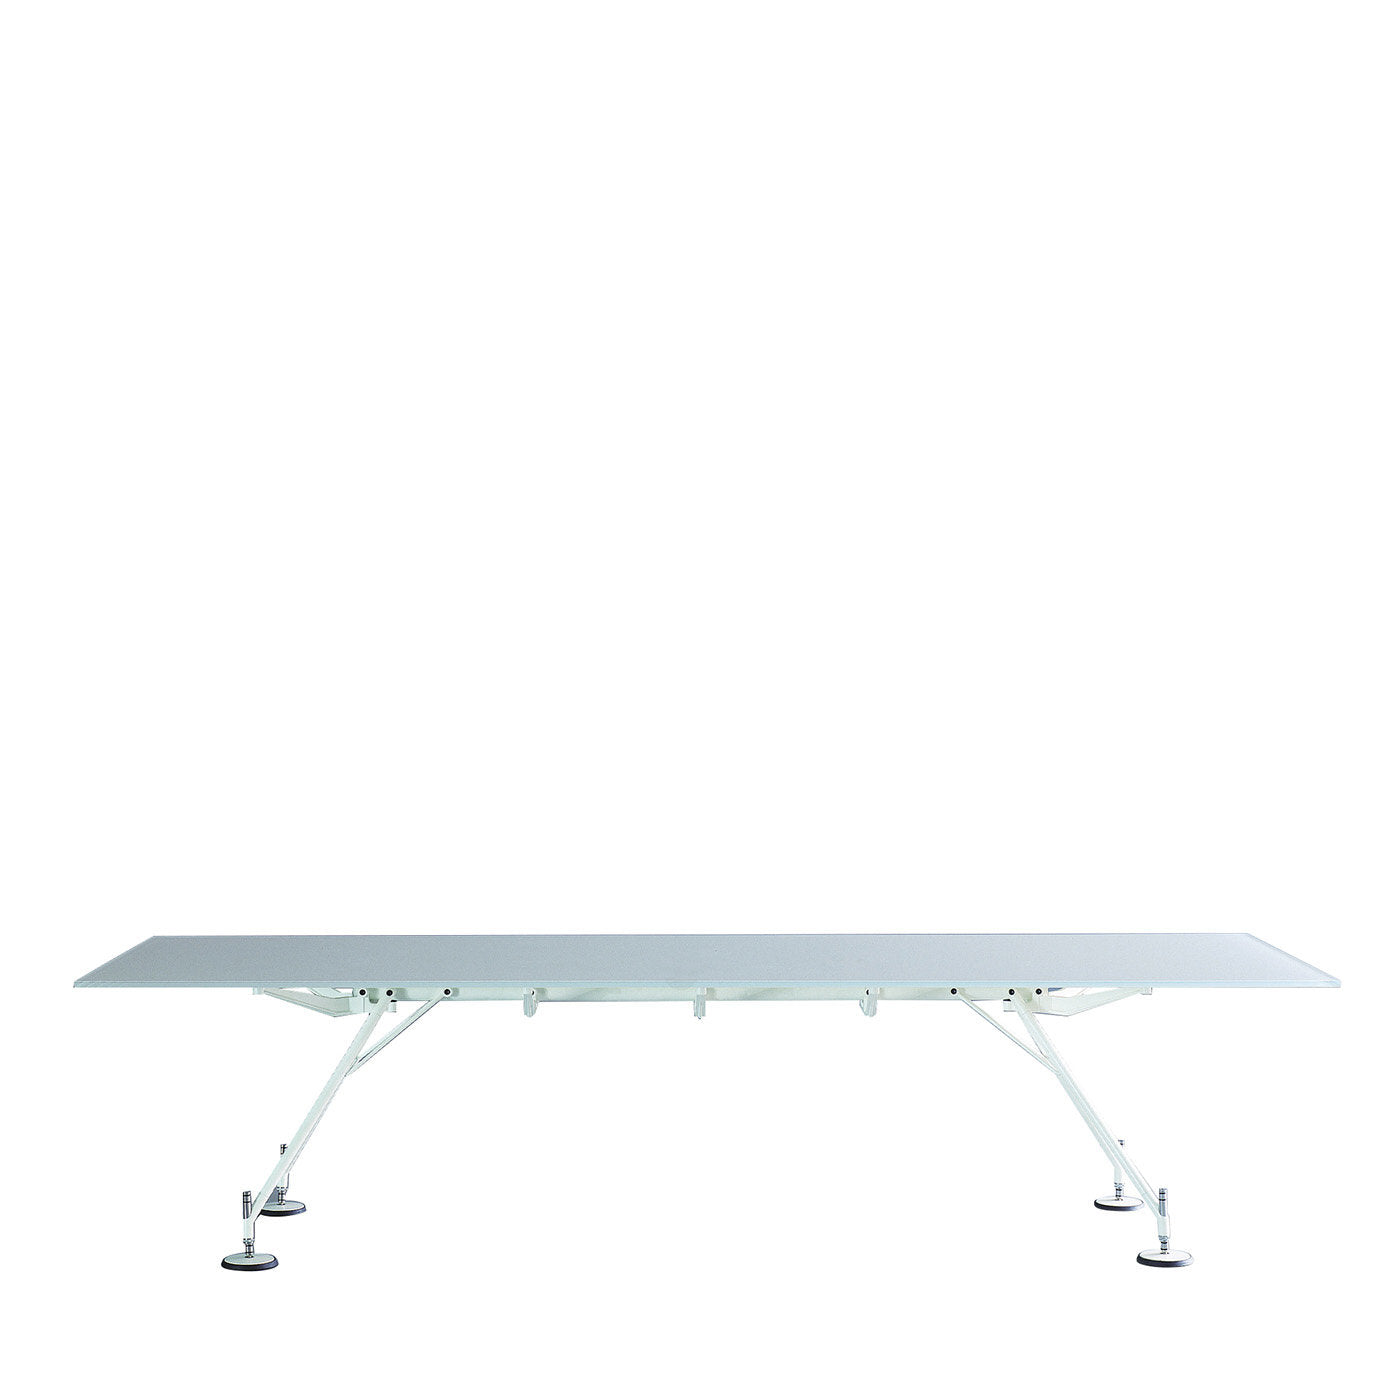 Nomos White Table by Norman Foster - Main view